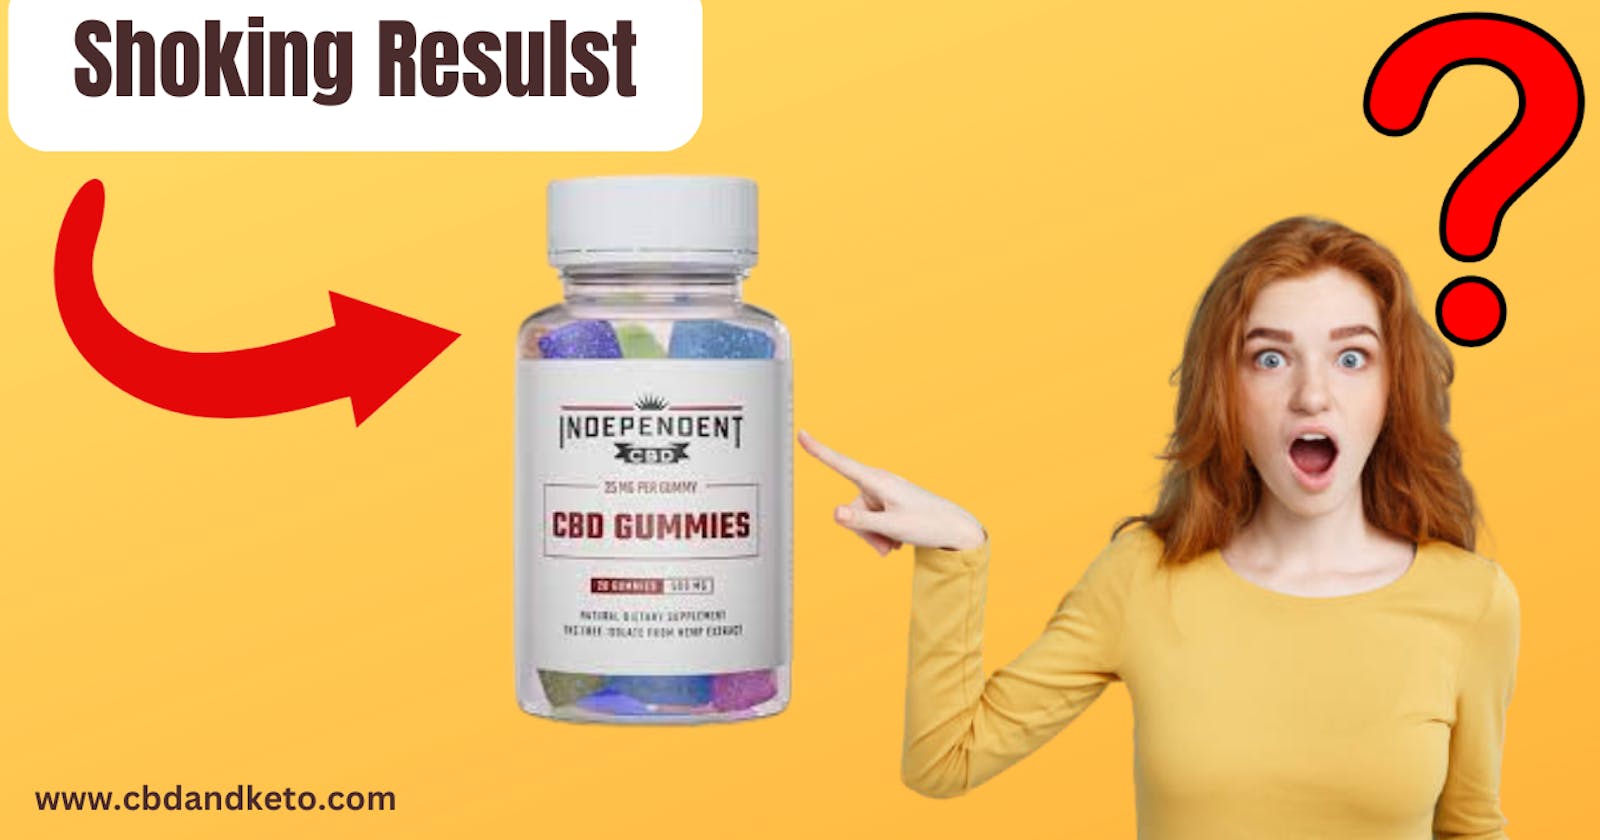 Independent CBD Gummies Review: Benefits How Do They Work?